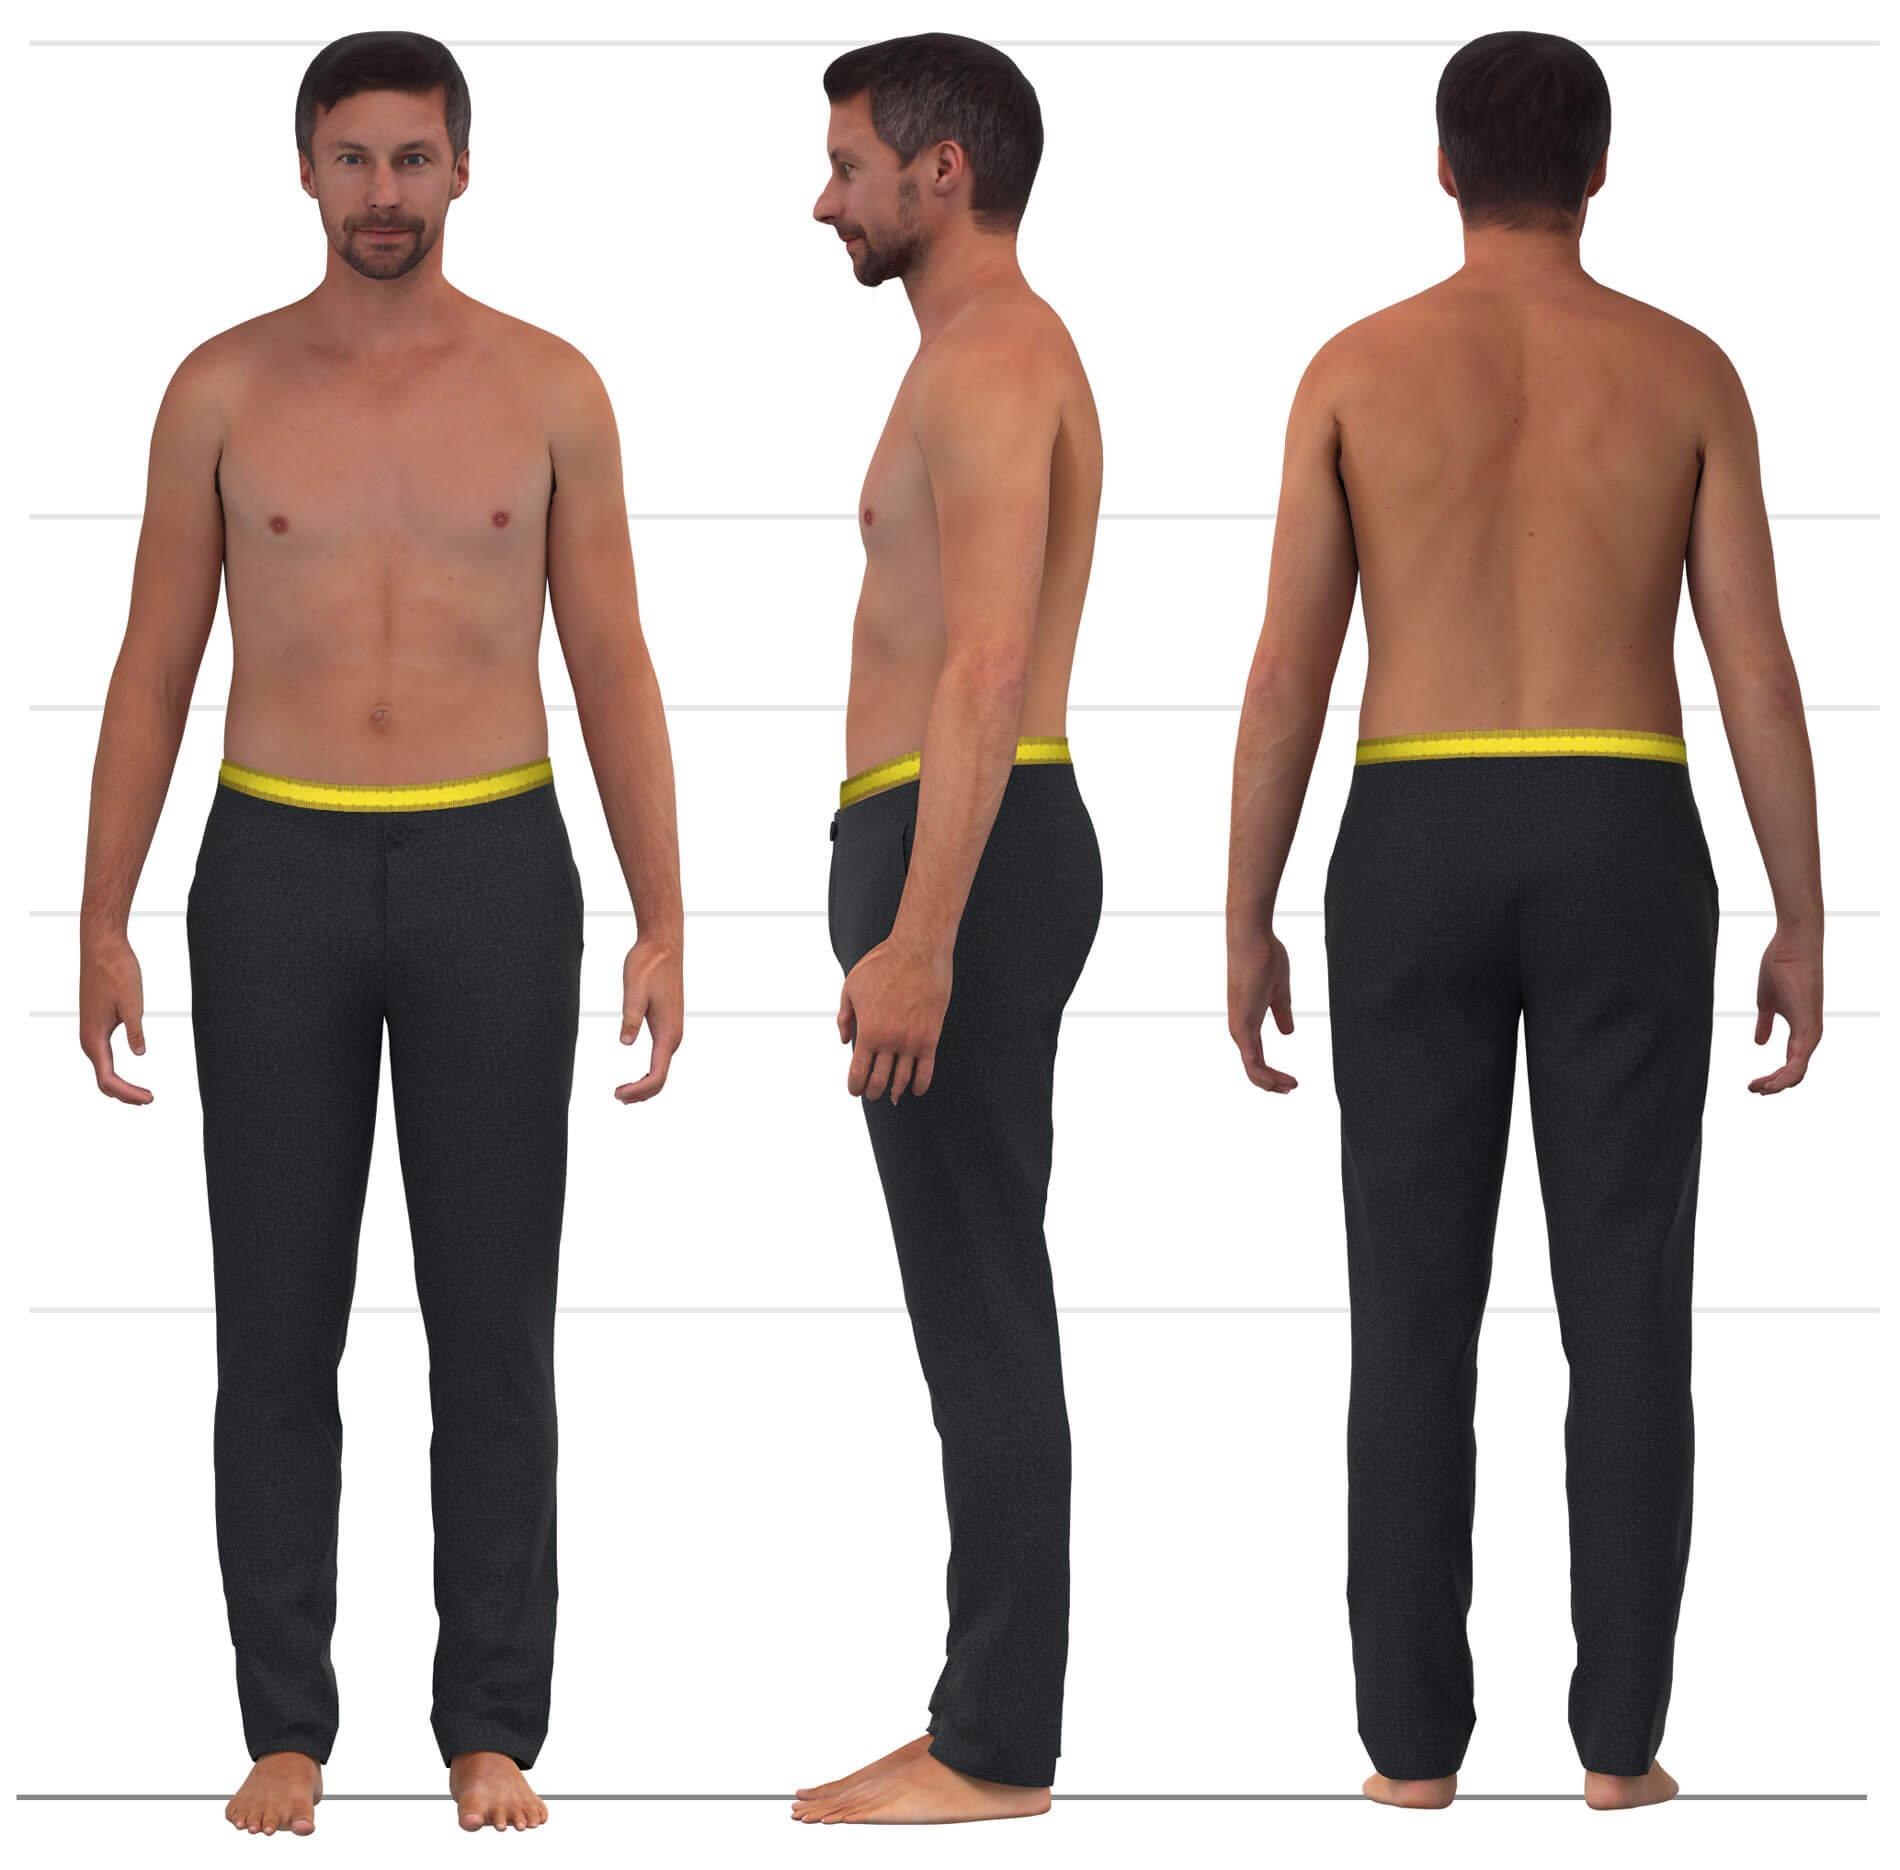 The picture shows the measurement of the waistband circumference for men's pants.